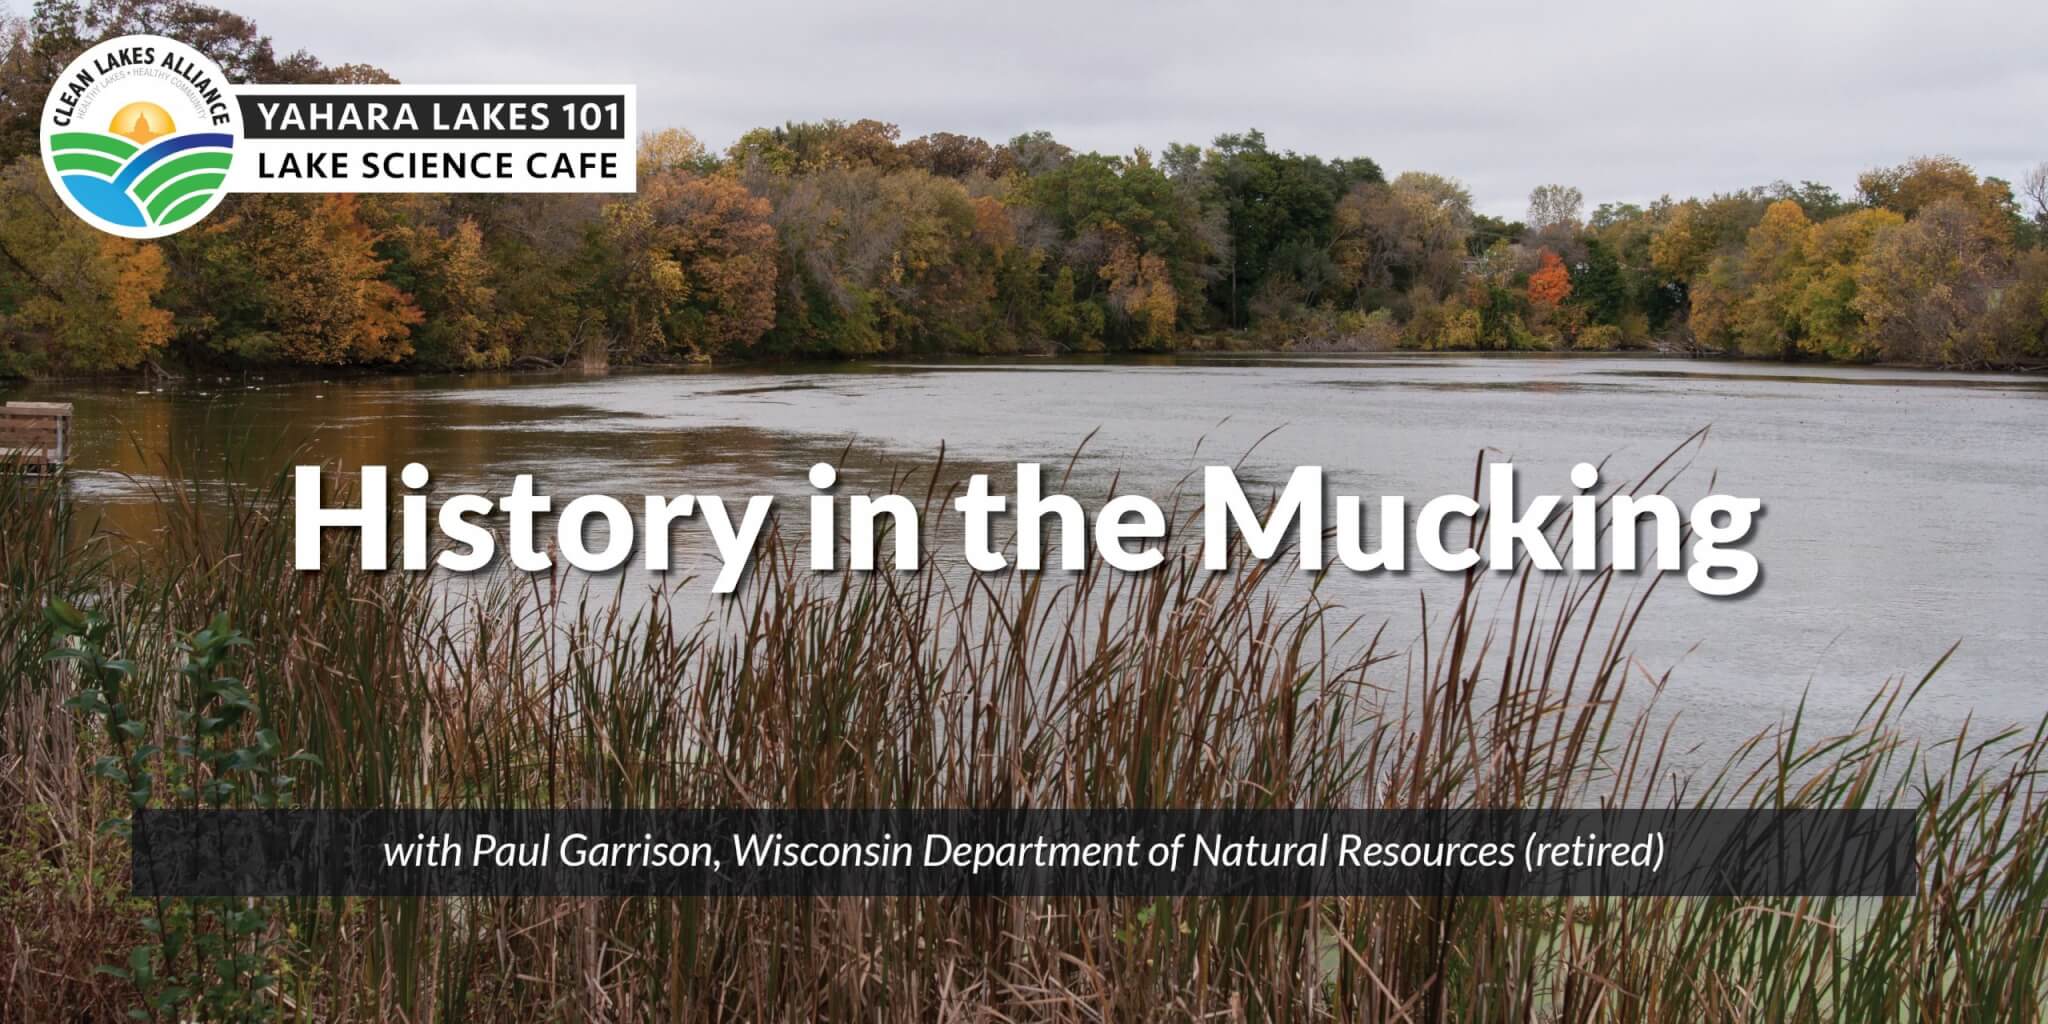 Yahara Lakes 101: History in the Mucking